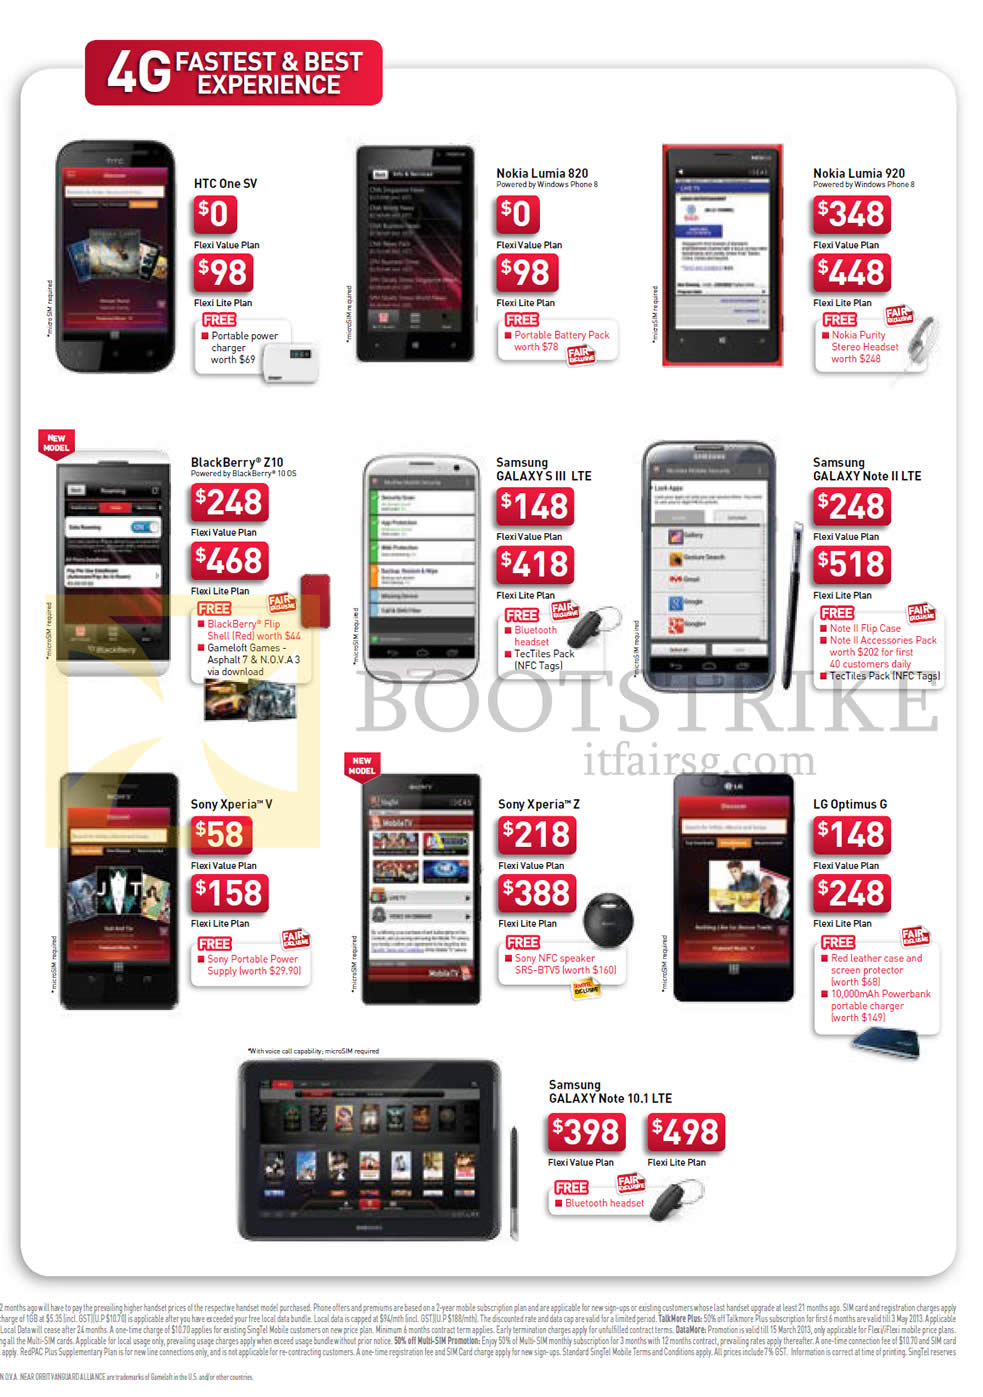 IT SHOW 2013 price list image brochure of Singtel Mobile Phones HTC One SV, Nokia Lumia 820, 920, Blackberry Z10, Samsung Galaxy S III LTE, Note 10.1 LTE, Note II LTE, Sony Xperia V, Xperia Z, LG Optimus G